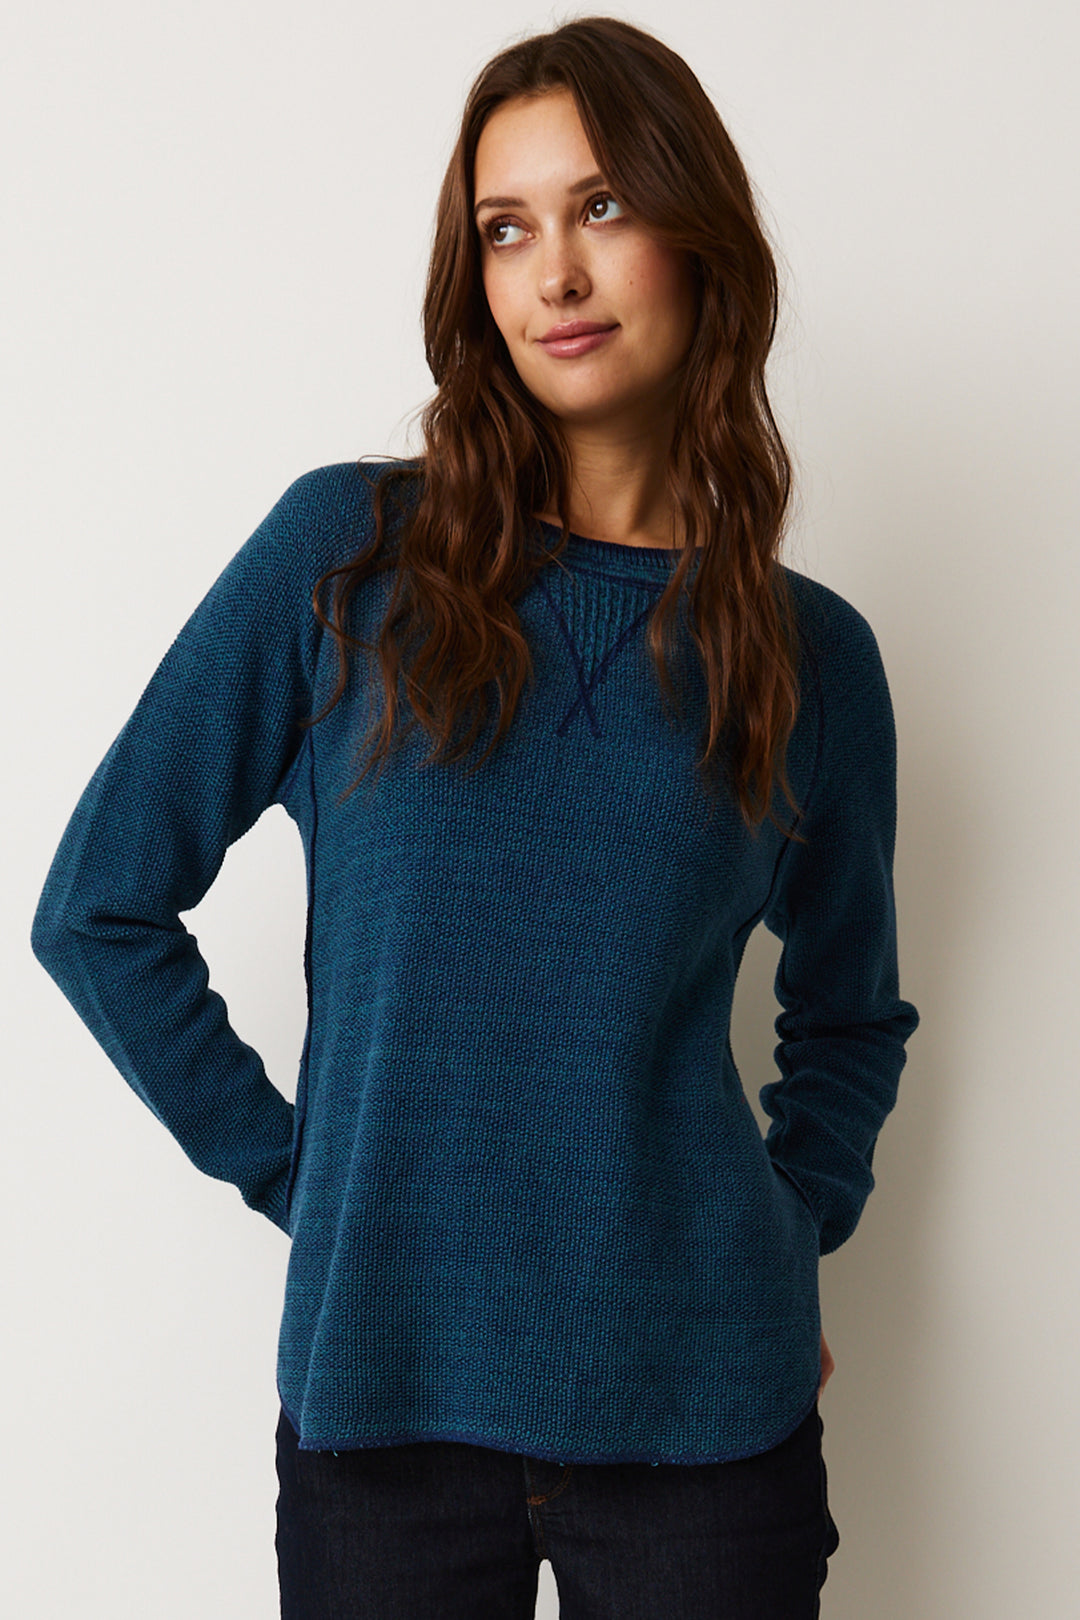 It features a unique raglan shoulder detail as well as a shirttail hem on both the front and back. Its full length sleeves provide comfort and warmth in all seasons.